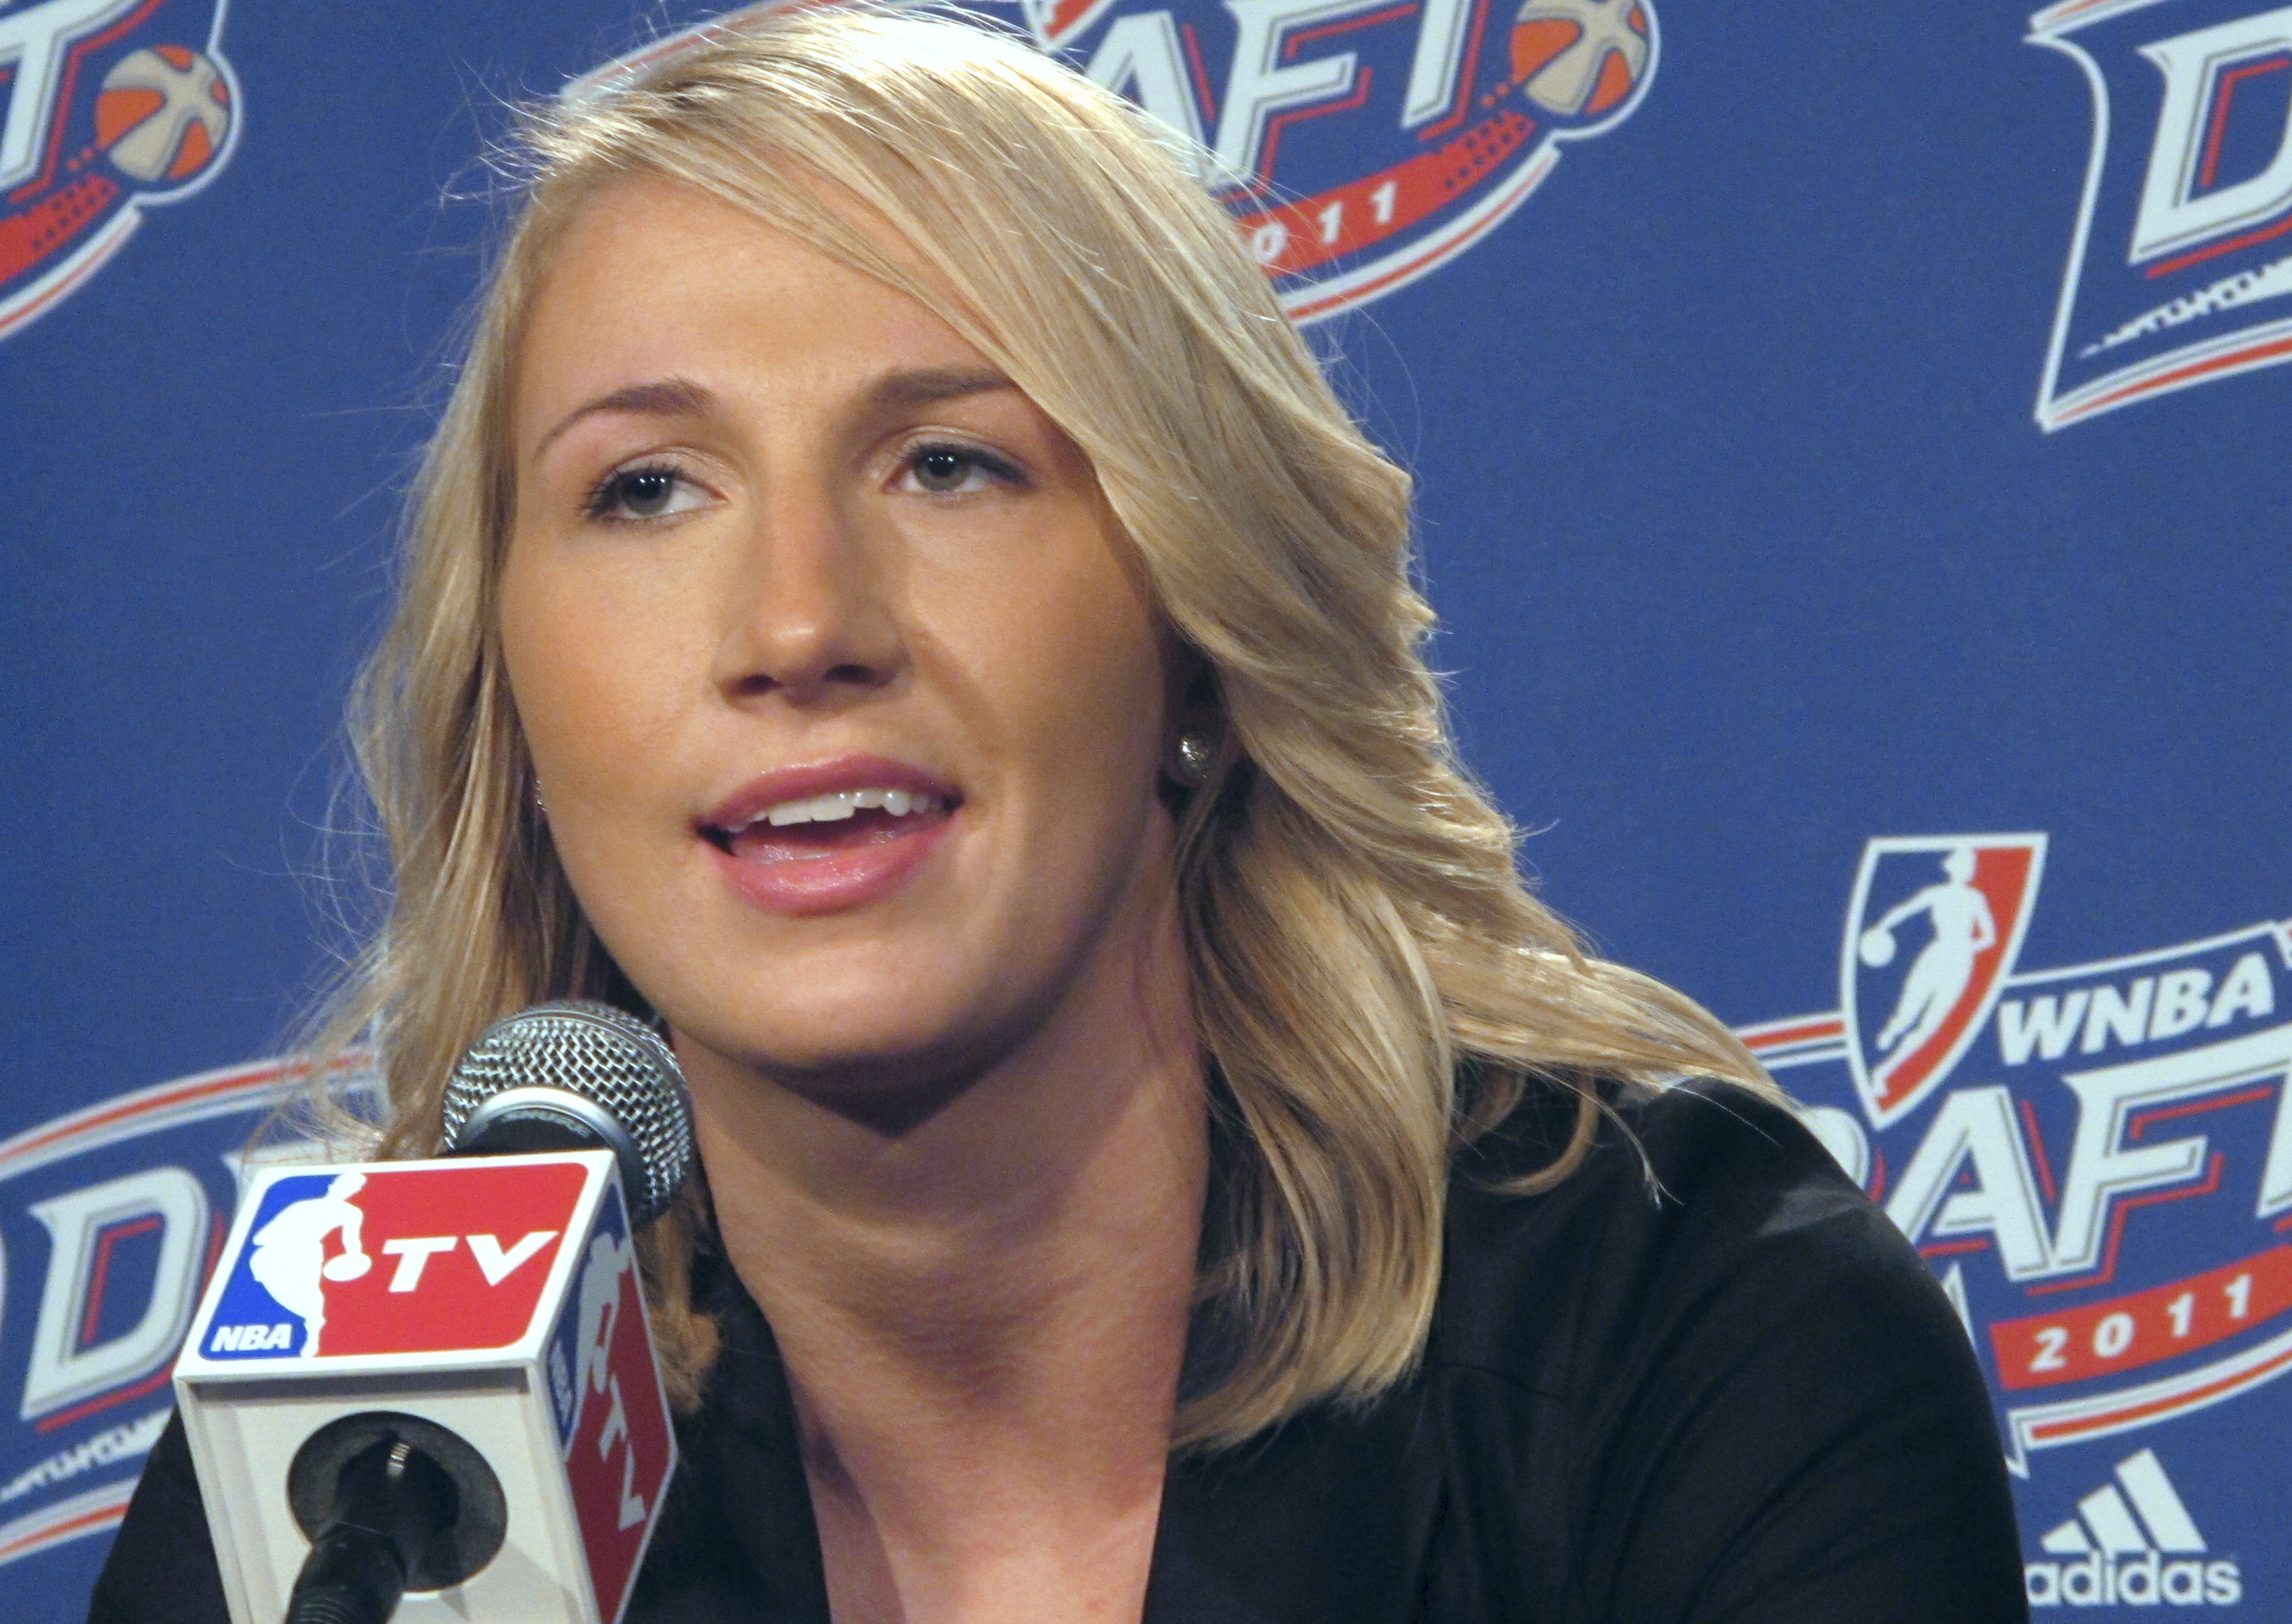 Courtney Vandersloot drafted The SpokesmanReview